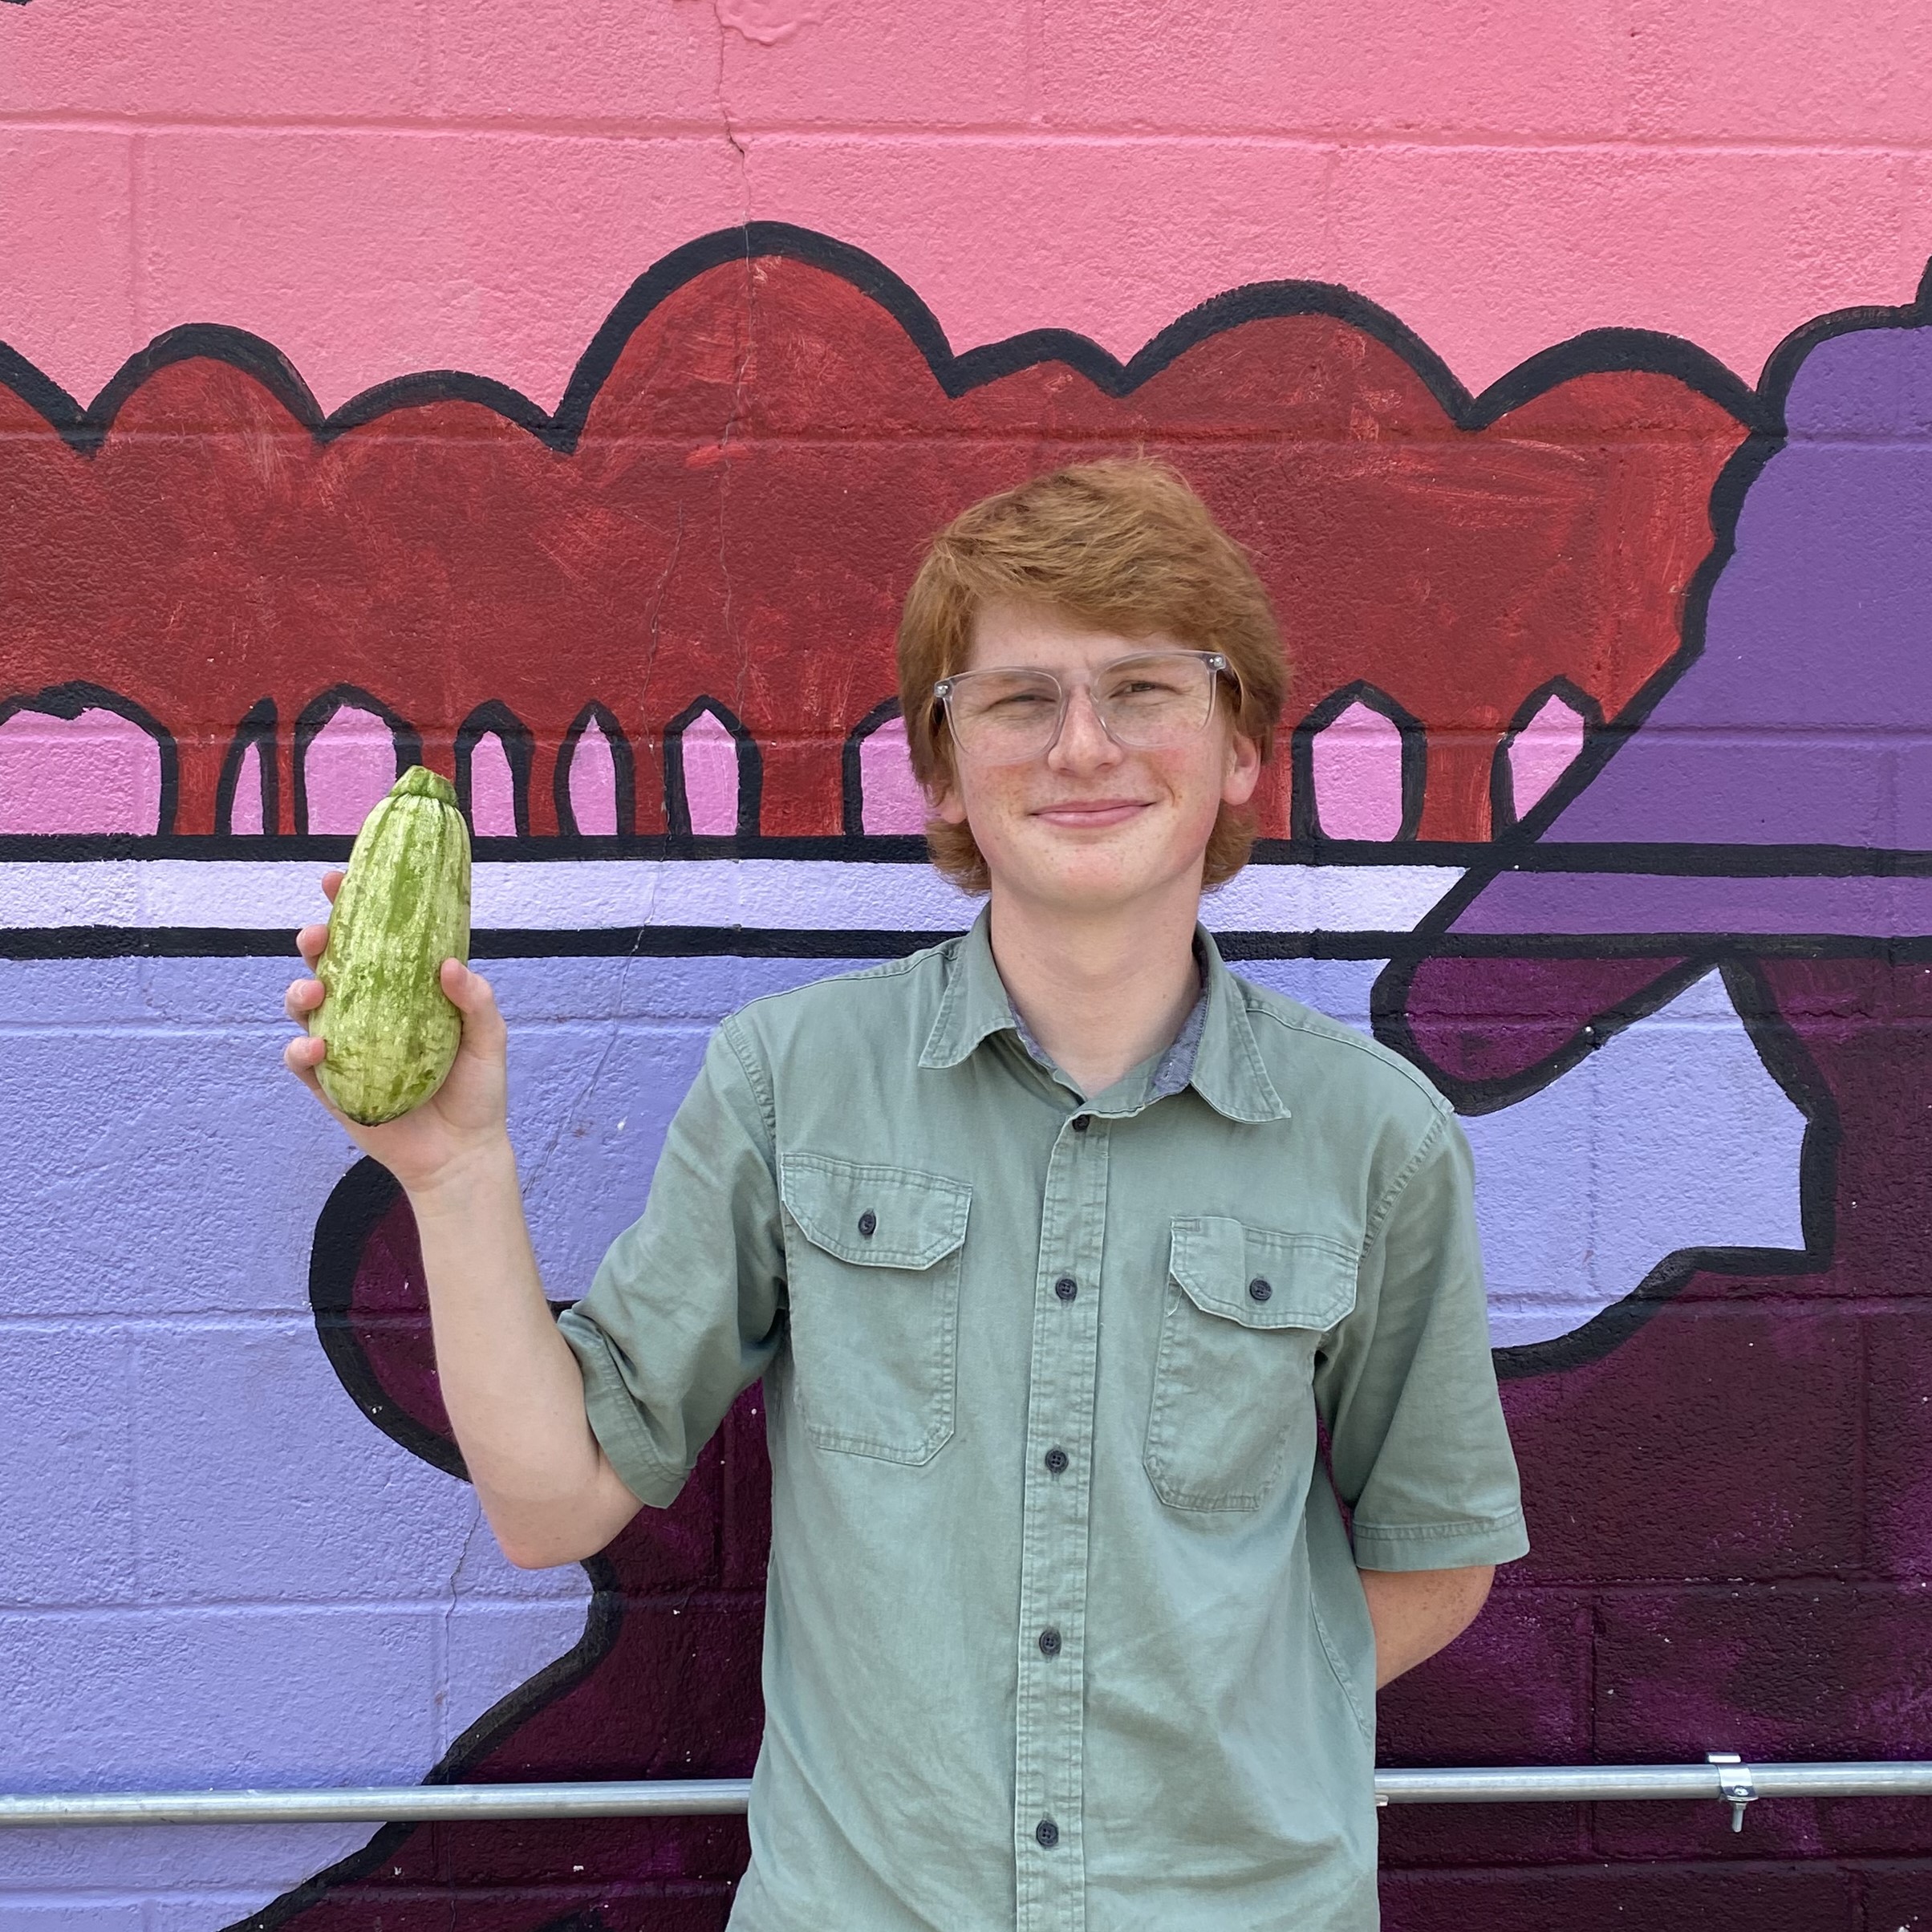 Noah stands against a purple painted mural, holding a green zucchini